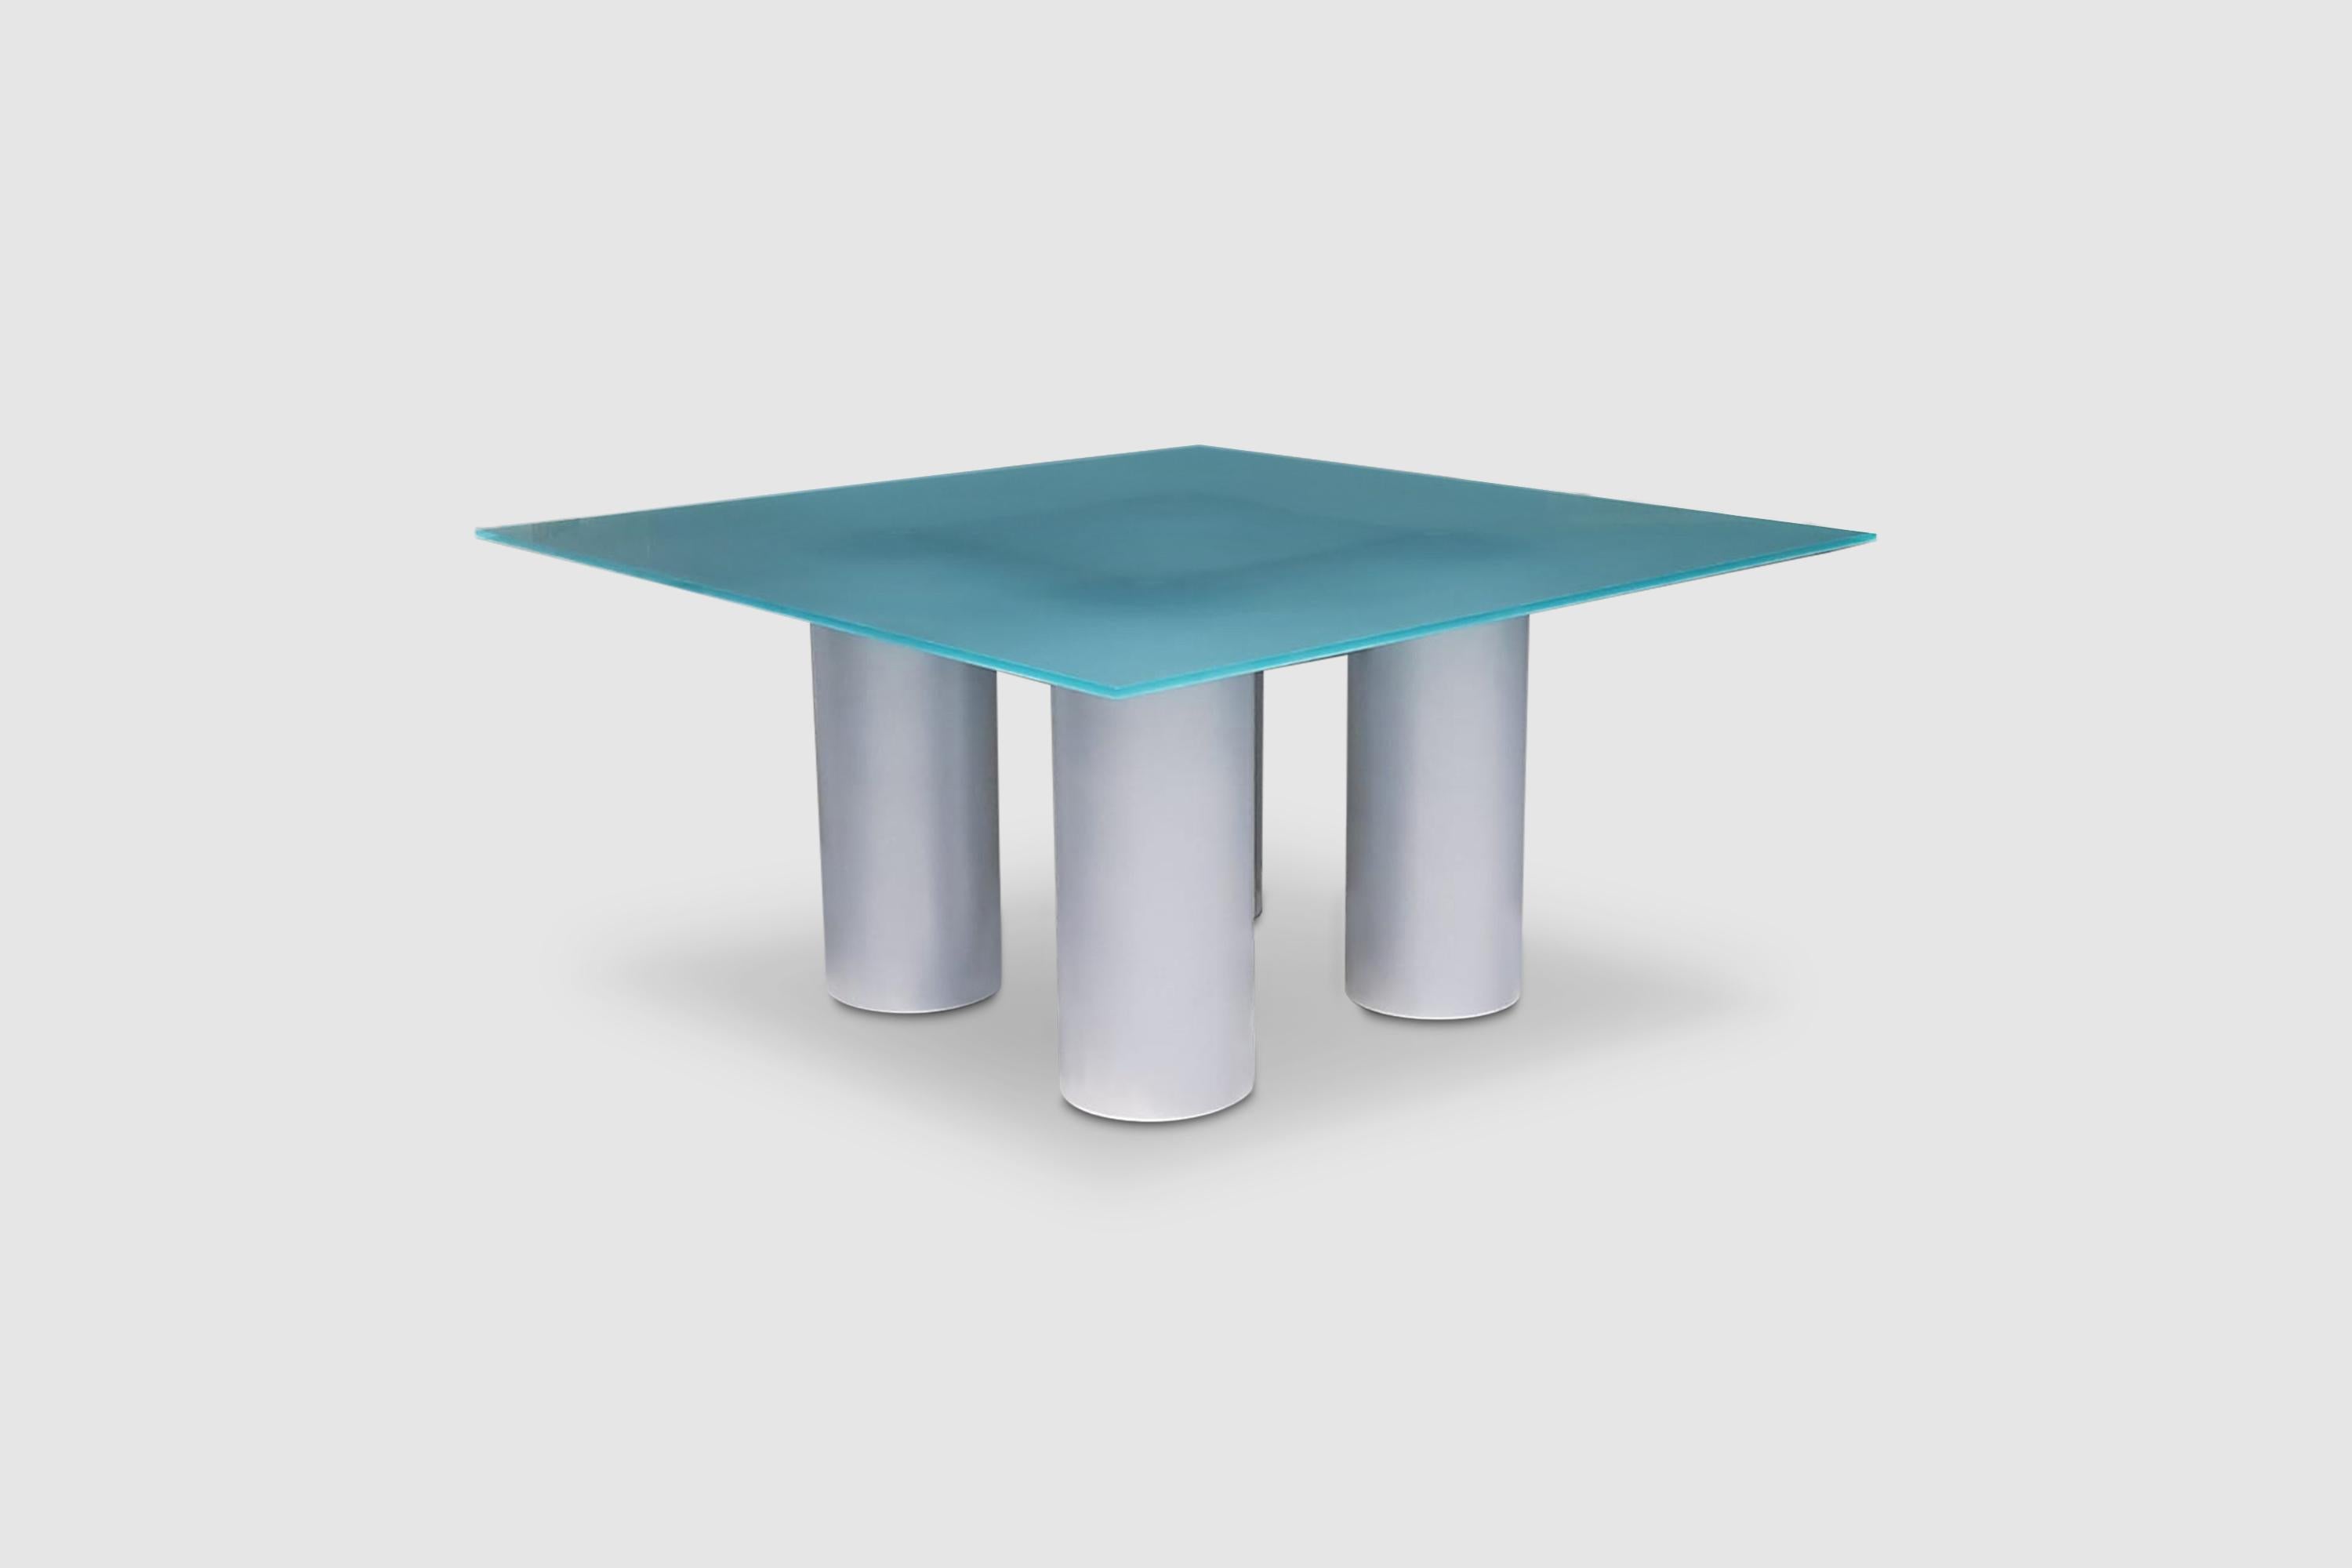 Serenissimo dining table by Lella & Massimo Vignelli for Acerbis 1980s For Sale 4